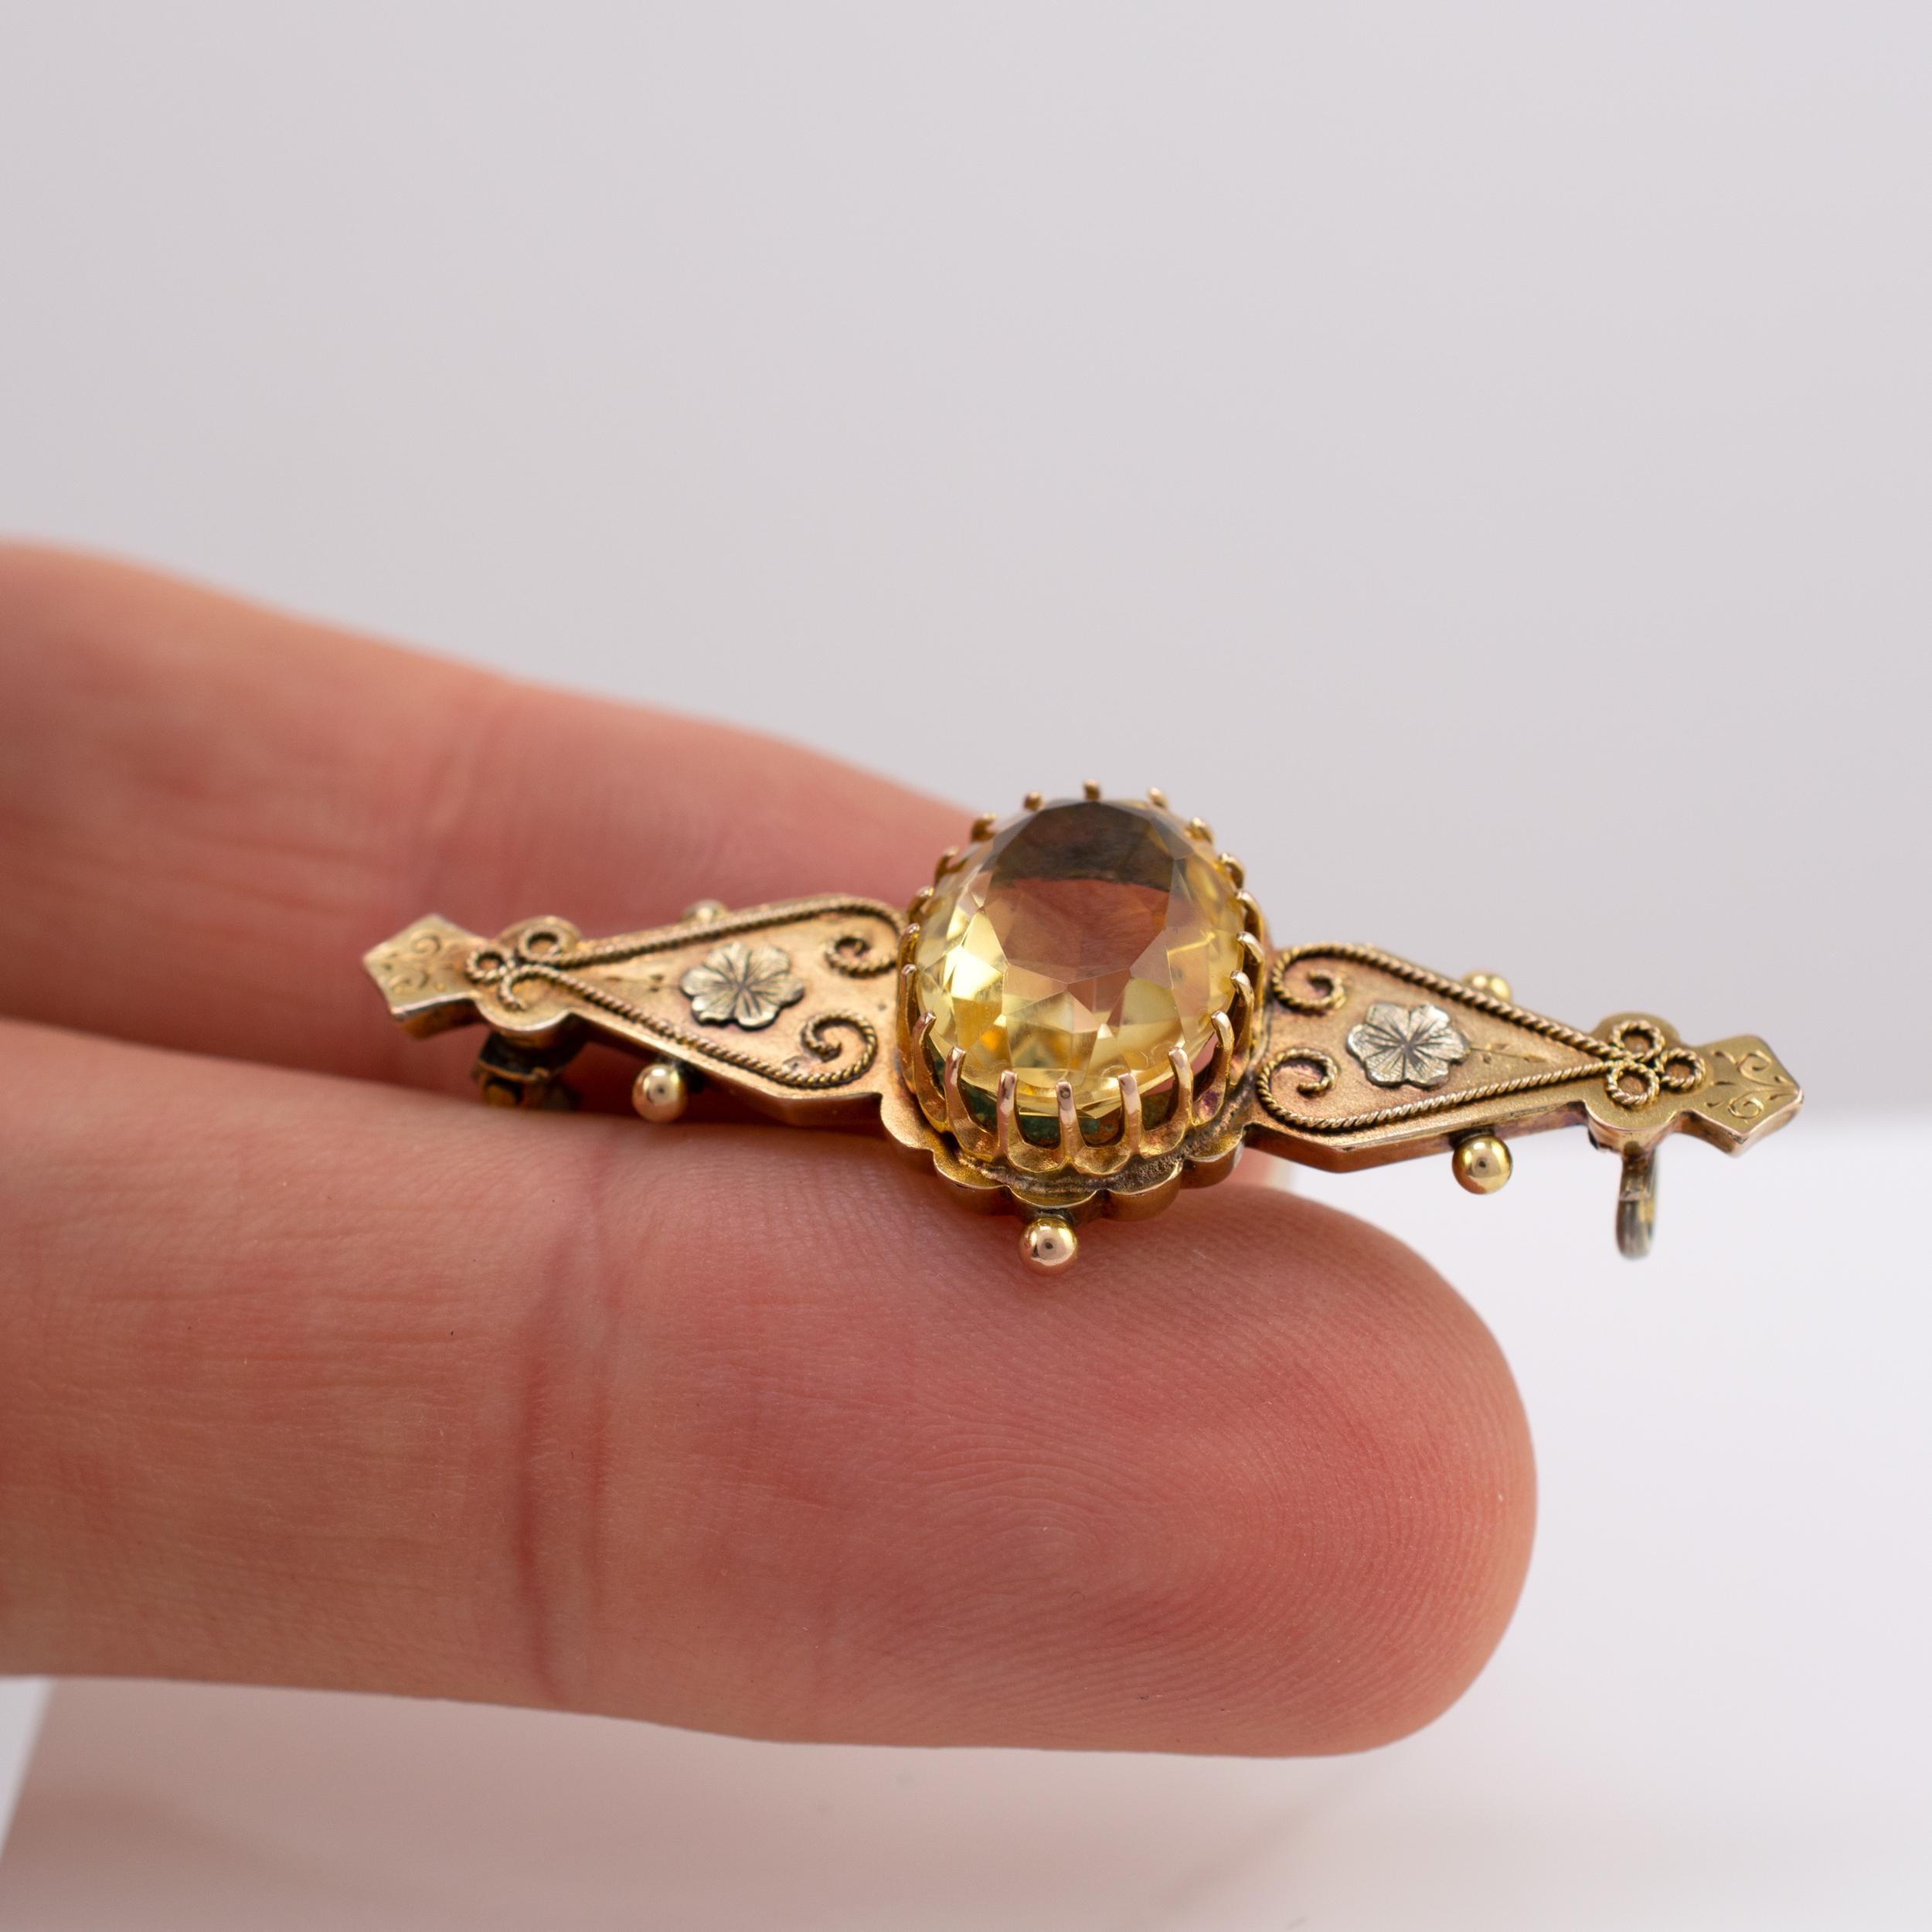 Oval Cut Antique Victorian Citrine Brooch with Cannetille Flowers Dated 1886 For Sale